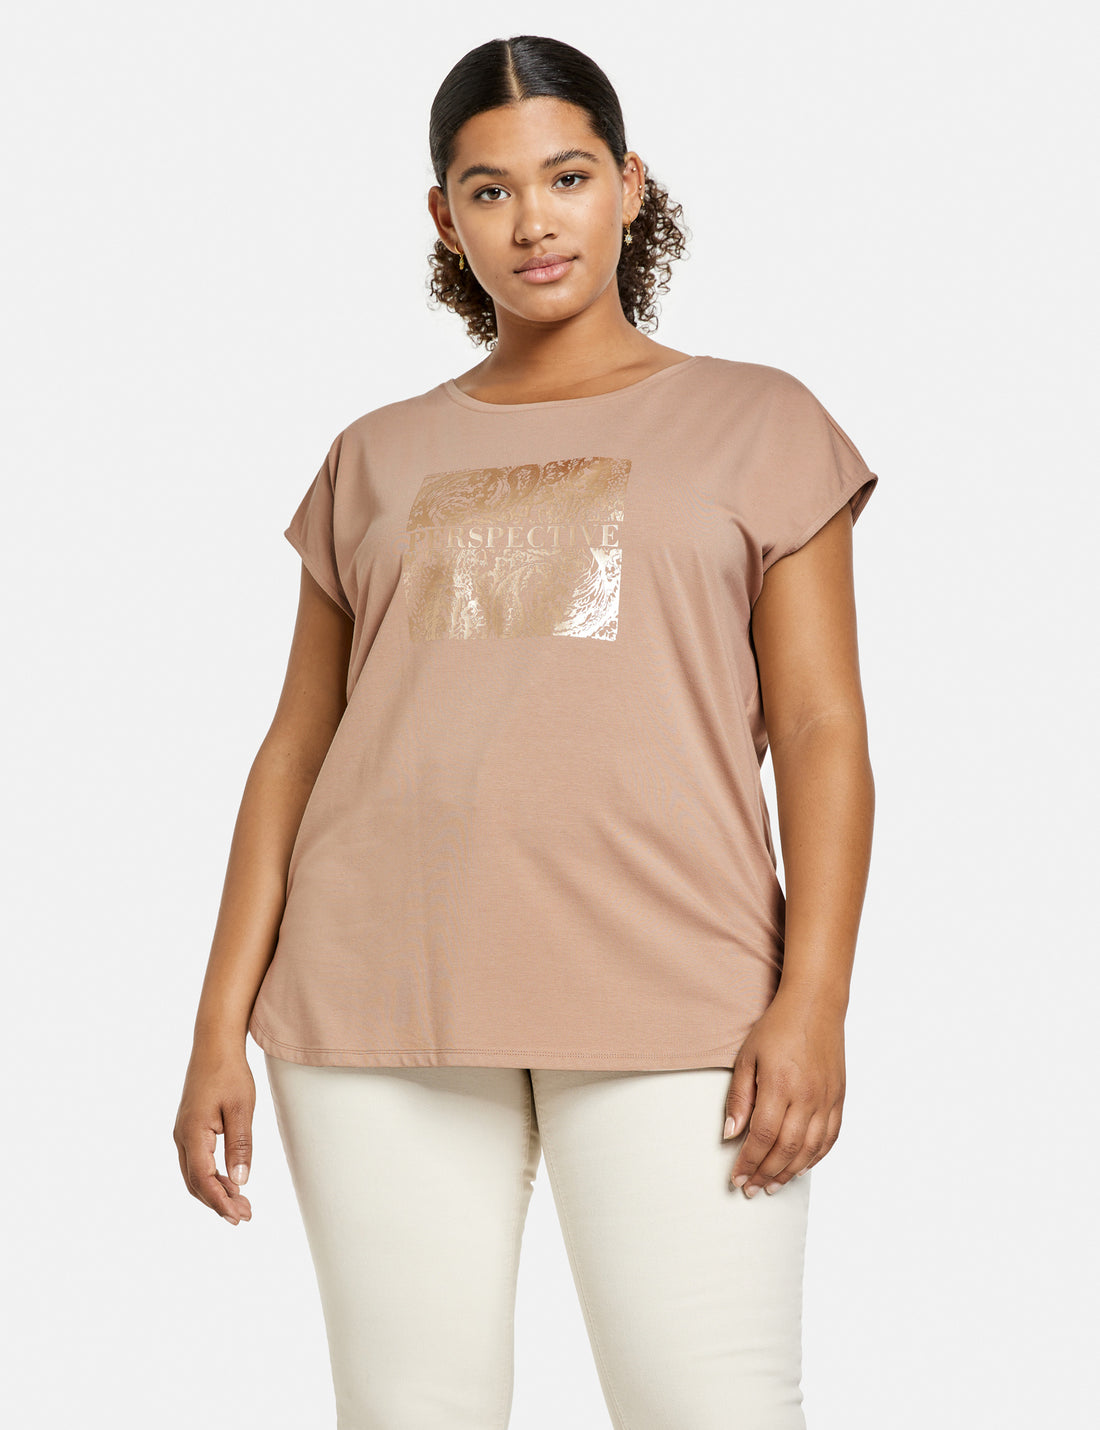 Beige T-Shirt With Metallic Print On The Front